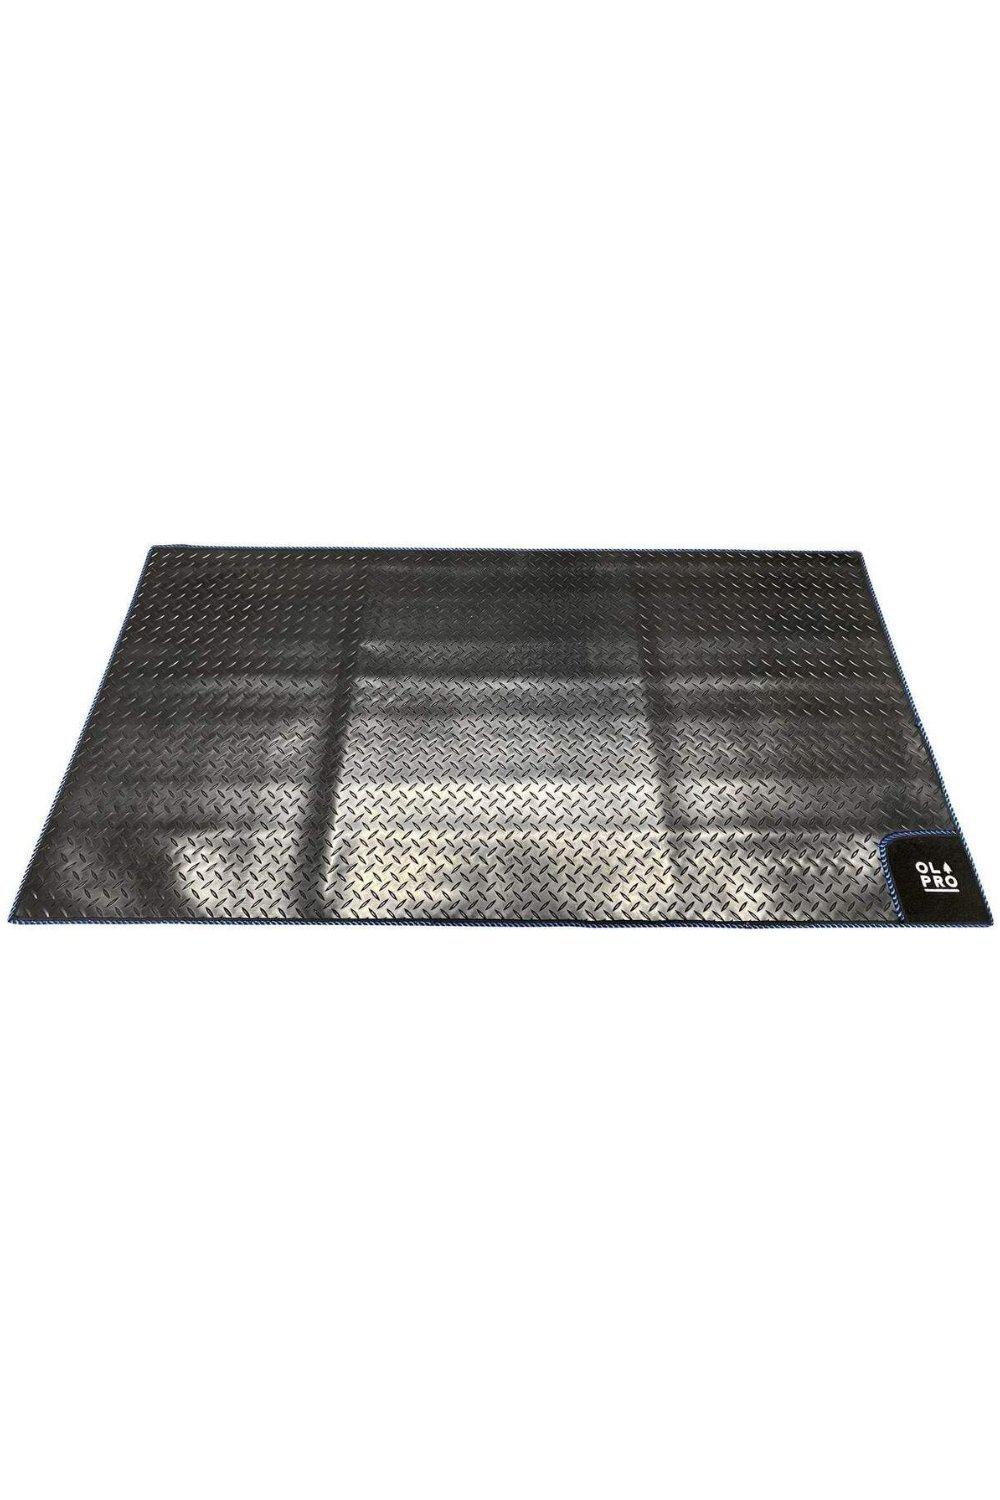 Awning Tunnel Mat with Blue Edge Trim